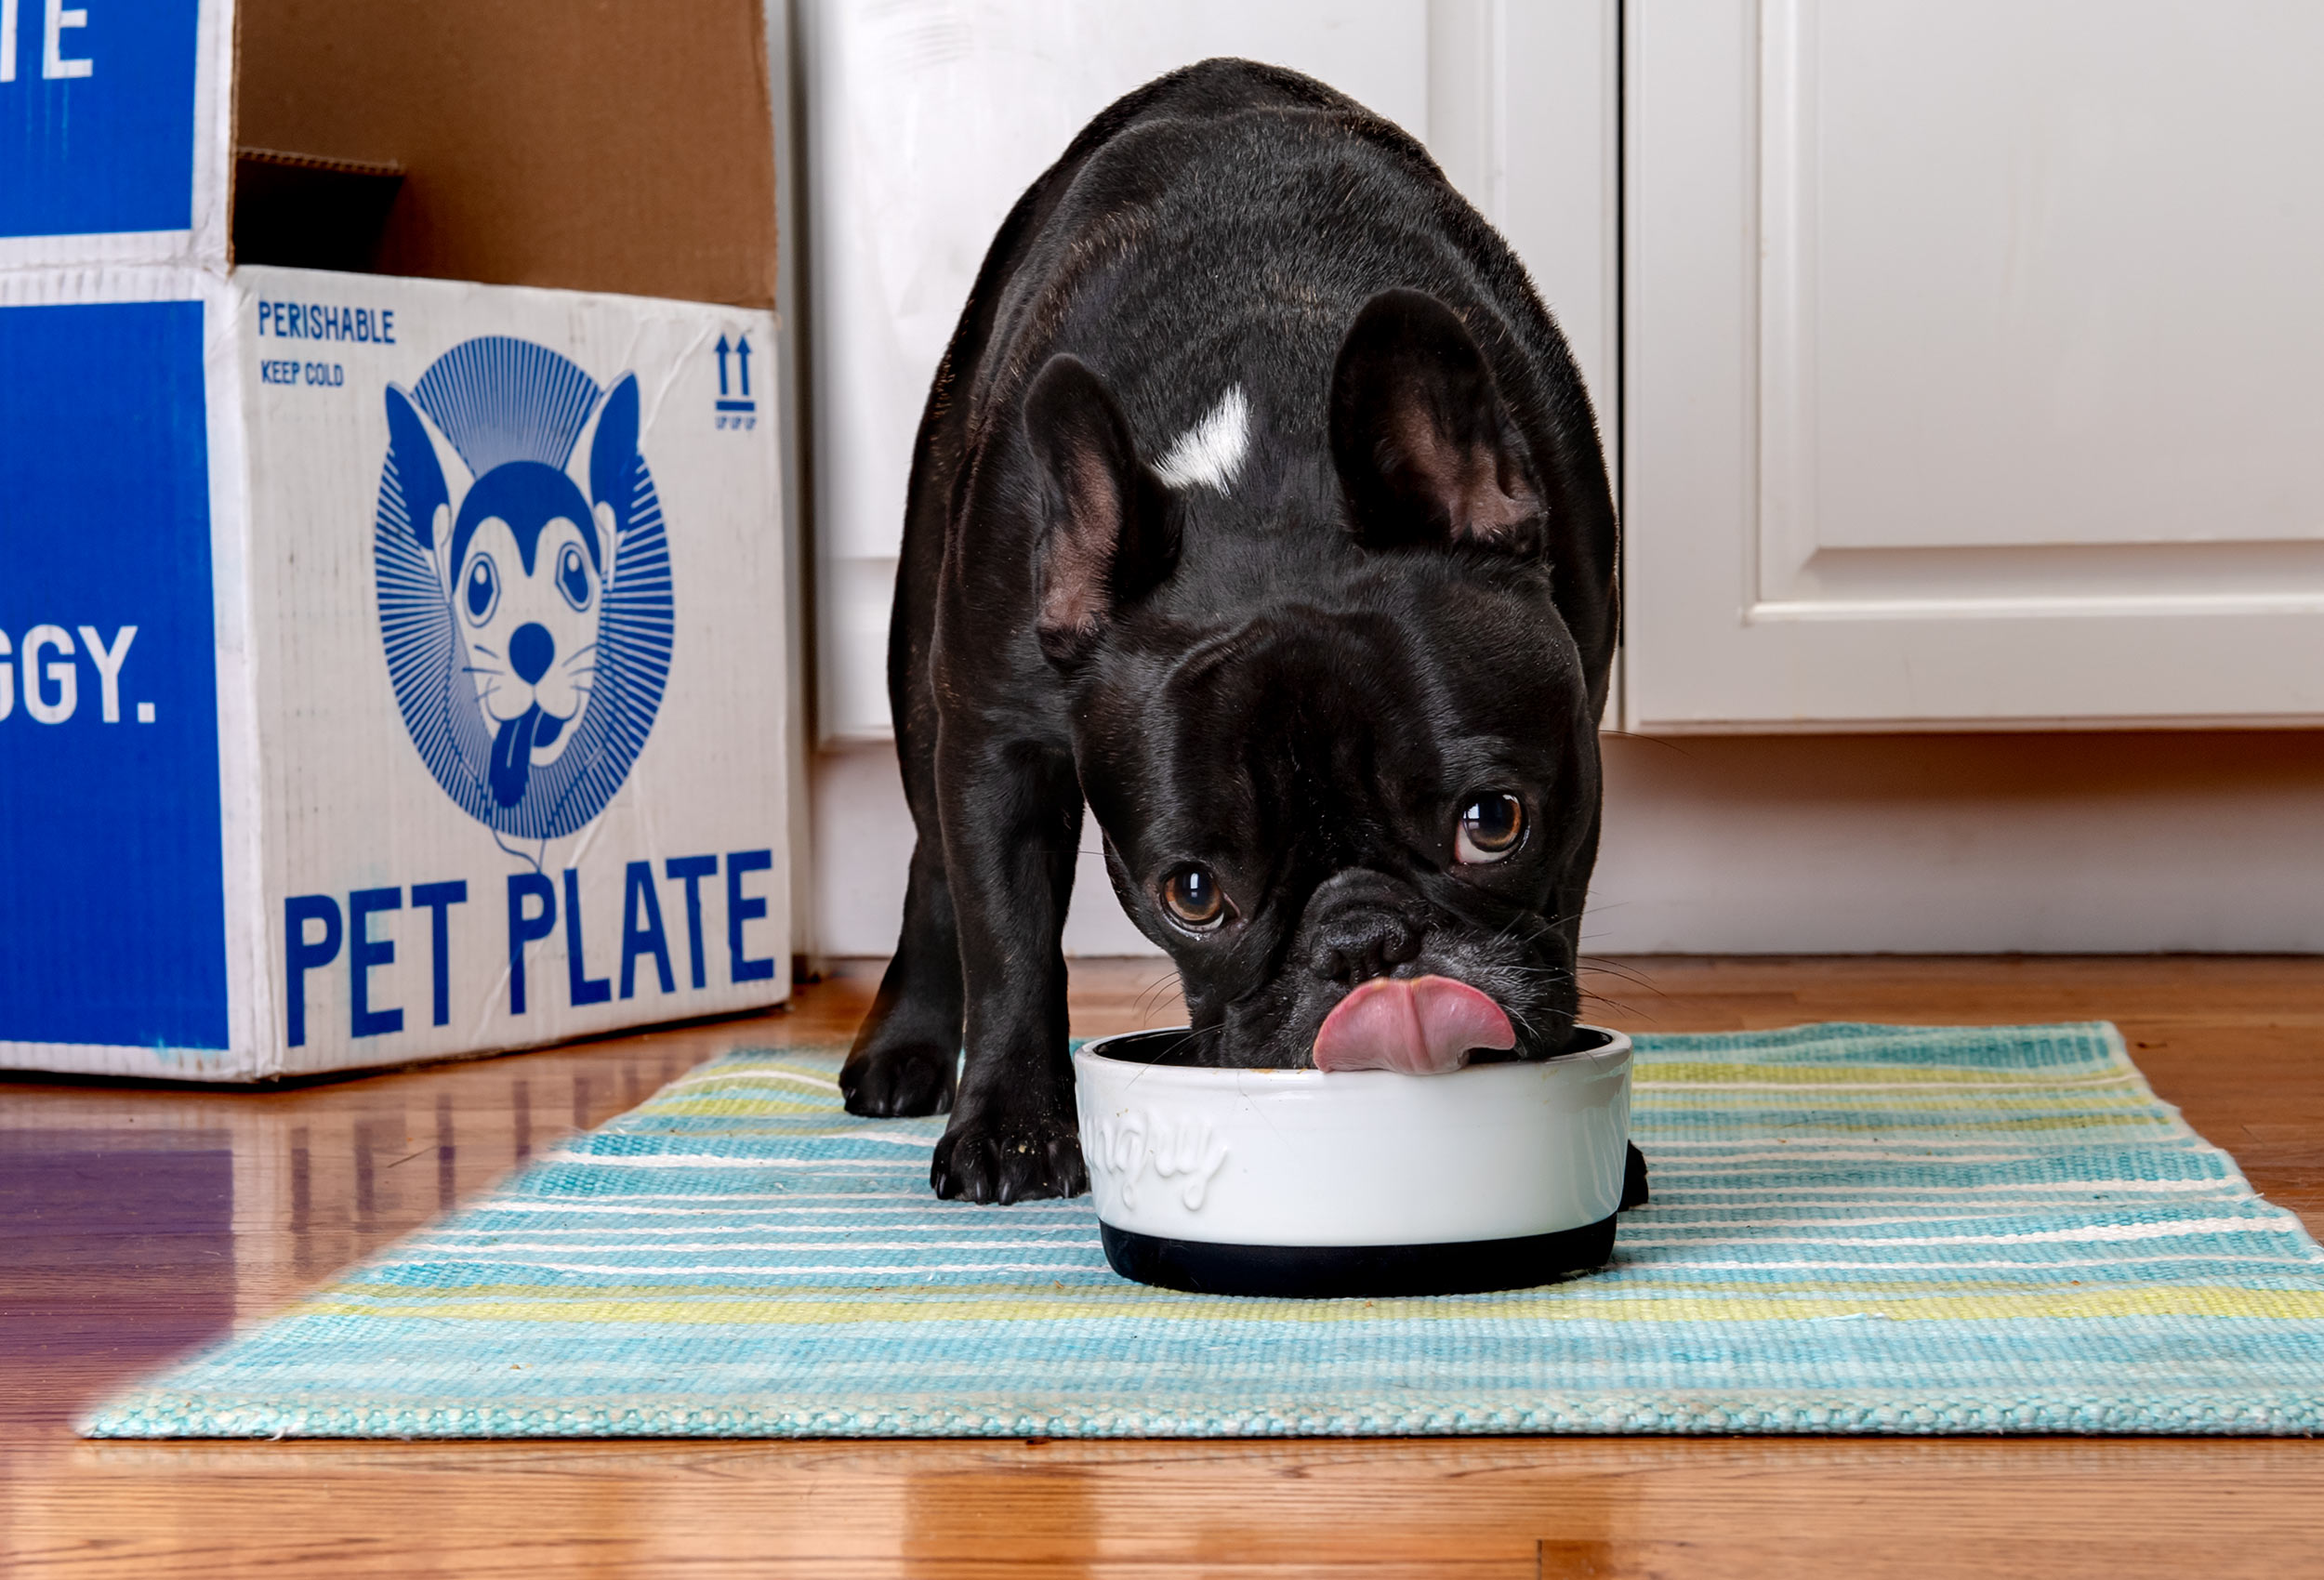 Black French Bulldog puppy eats from bowl with Pet Plate delivery box in background